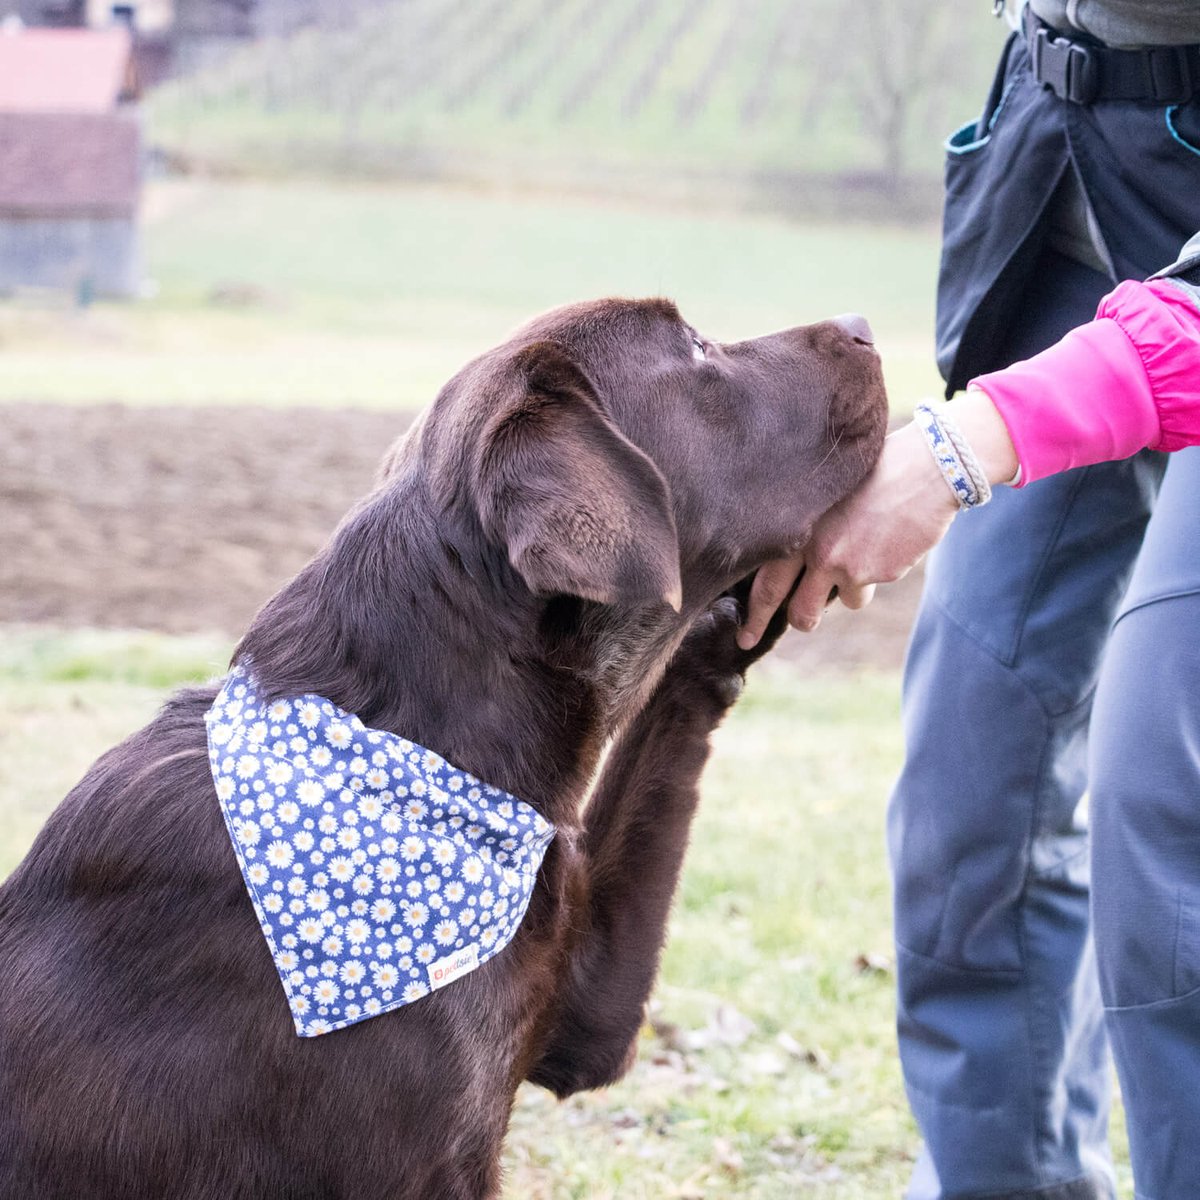 Style meets companionship with Pettsie's dog collar featuring a trendy bandana and a matching friendship bracelet for you! 🐾💖 Strengthen your bond with your furry friend in style. Because every adventure is better together! 🐶✨

#pettsie #dogbandana #dogcollars  #dapperdog